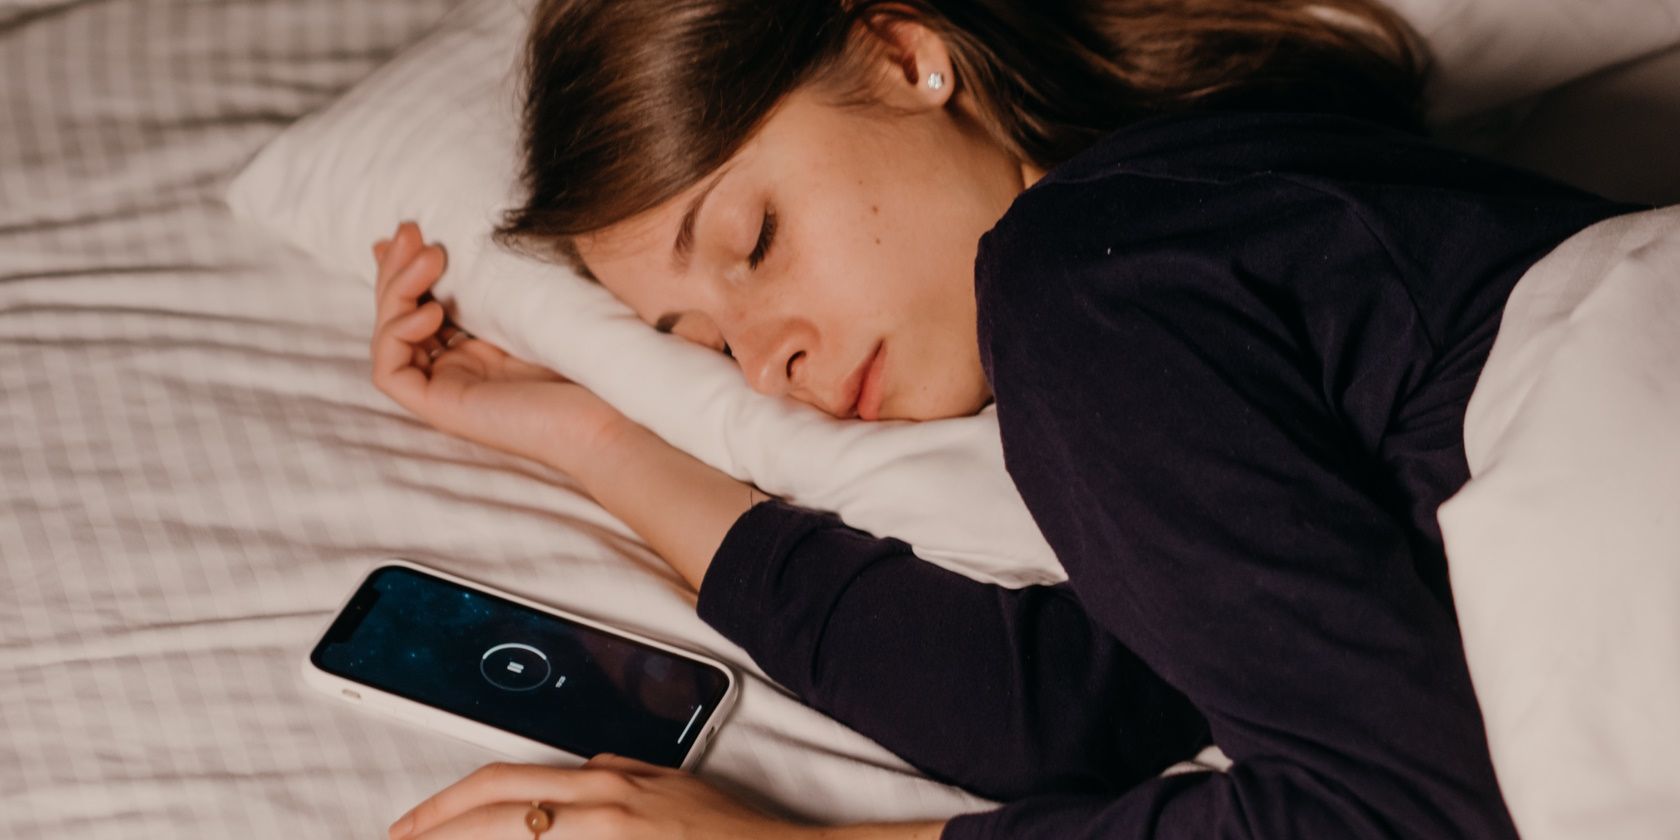 woman lying in bed and sleeping next to smartphone